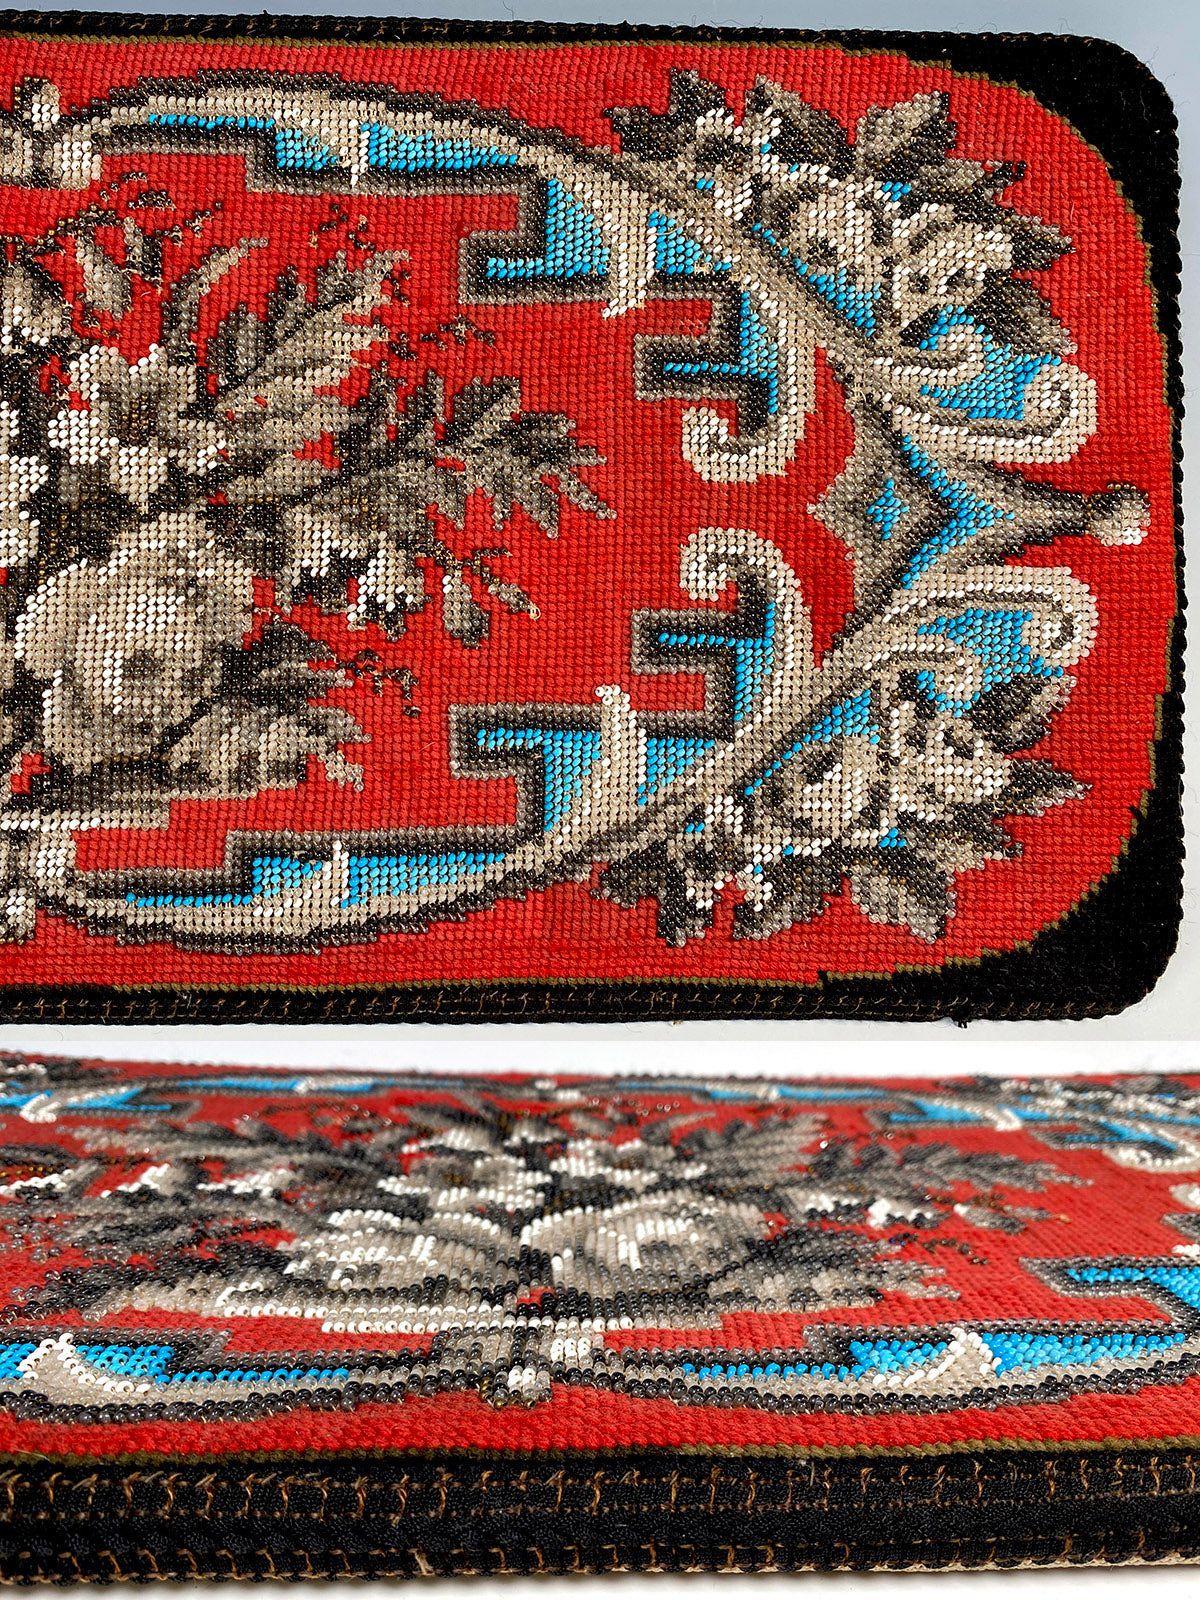 Fine Antique Victorian Era Needlepoint and Beadwork 23" x 10" Panel, Tapestry Ready for Pillow Project